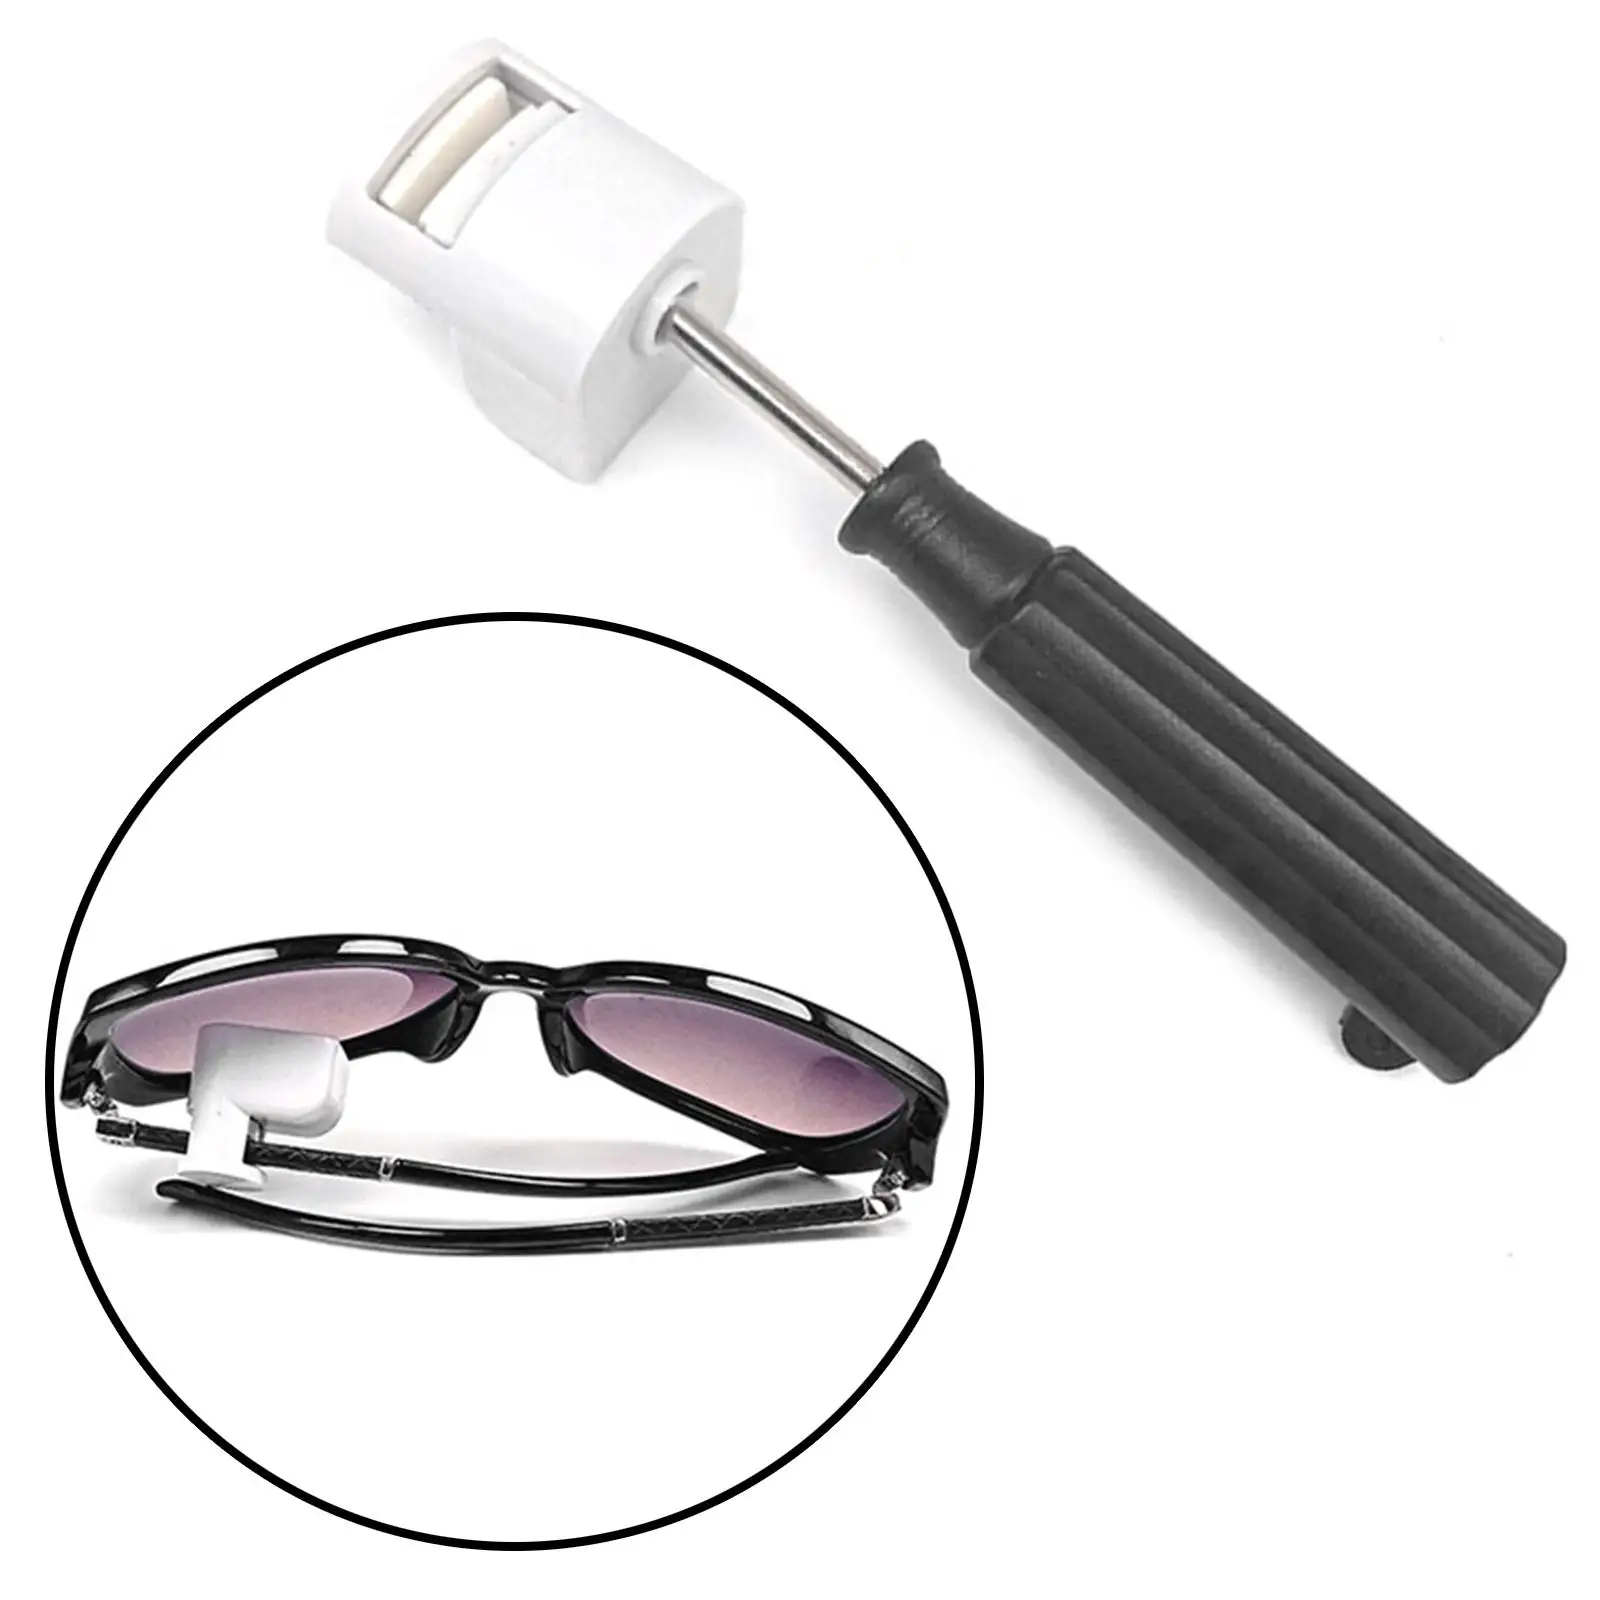 Glasses Screwdriver Household Precision Sunglasses Multifunctional Remover 9mm Compact Eye Glass Repairing Portable